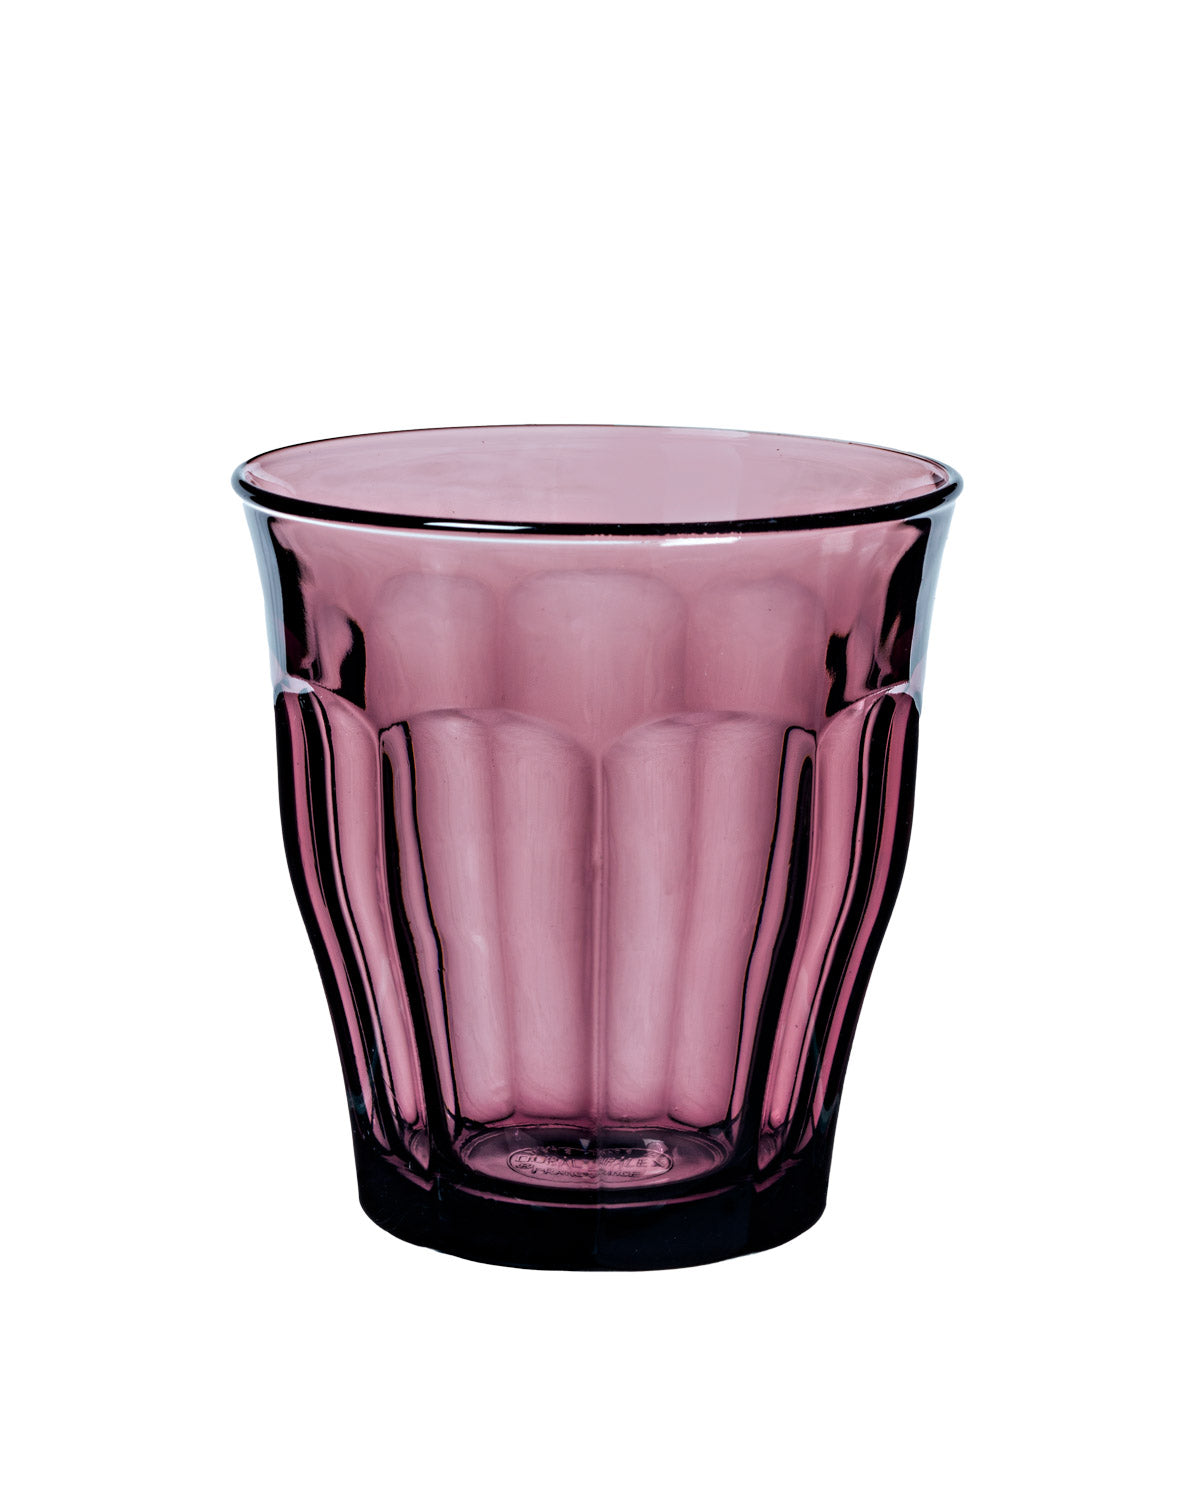 Le Picardie® Plum Tumbler 8.38oz, Set of 4 | Duralex USA | Made In France